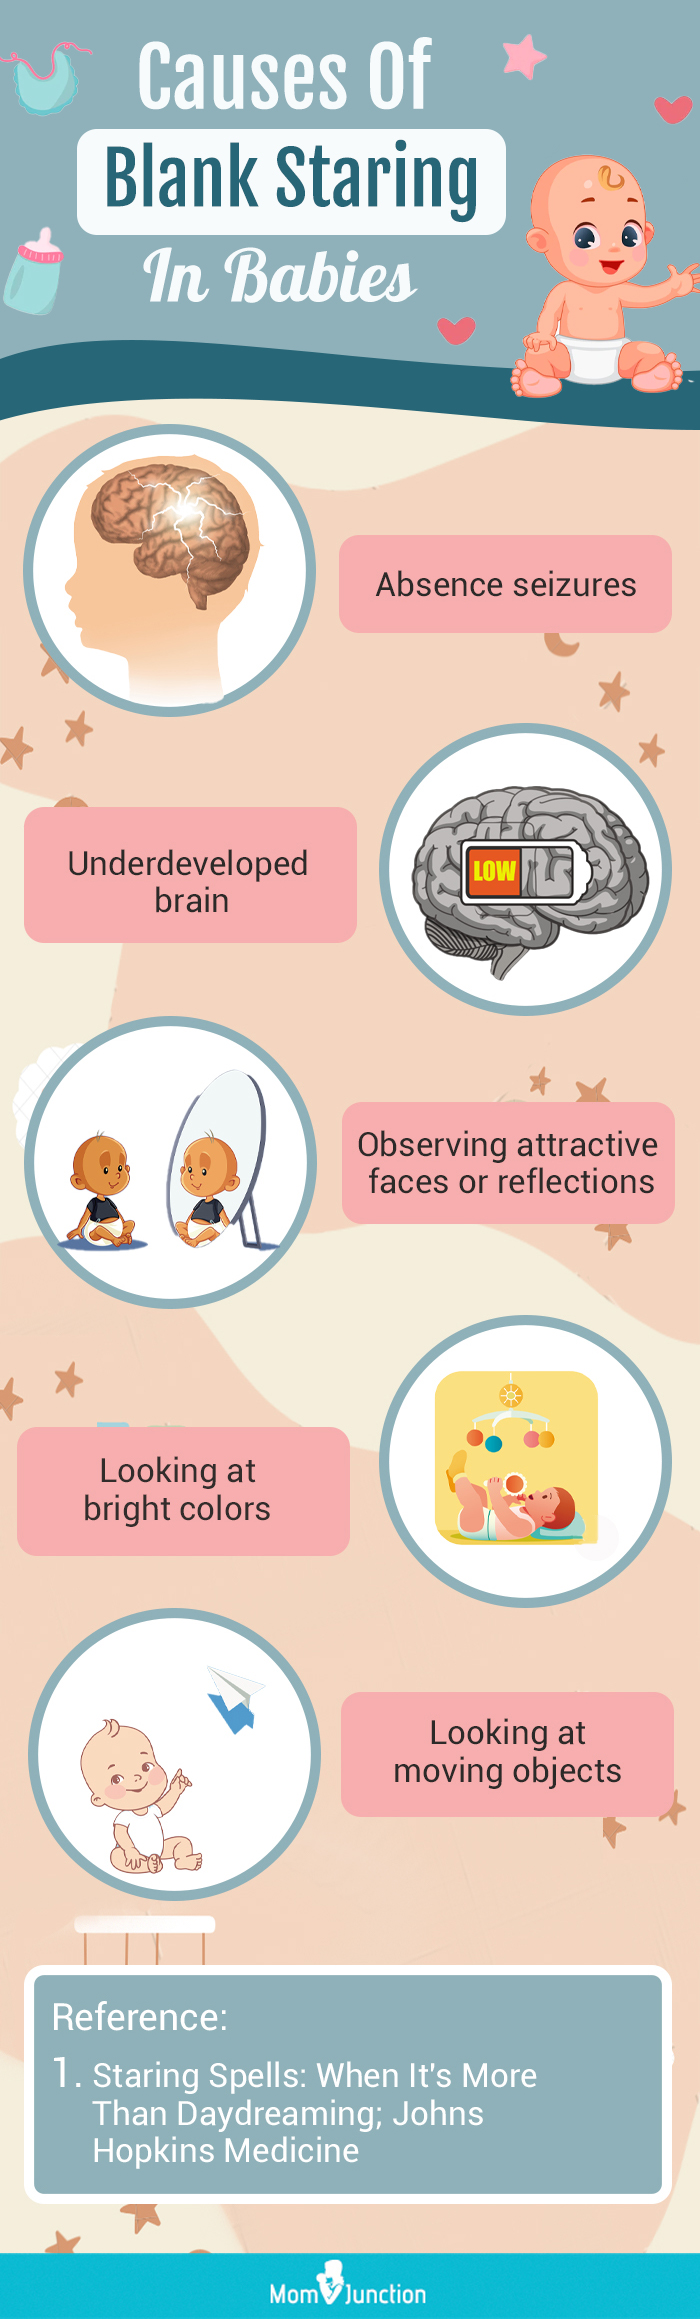 causes of balank staring in babies (infographic)